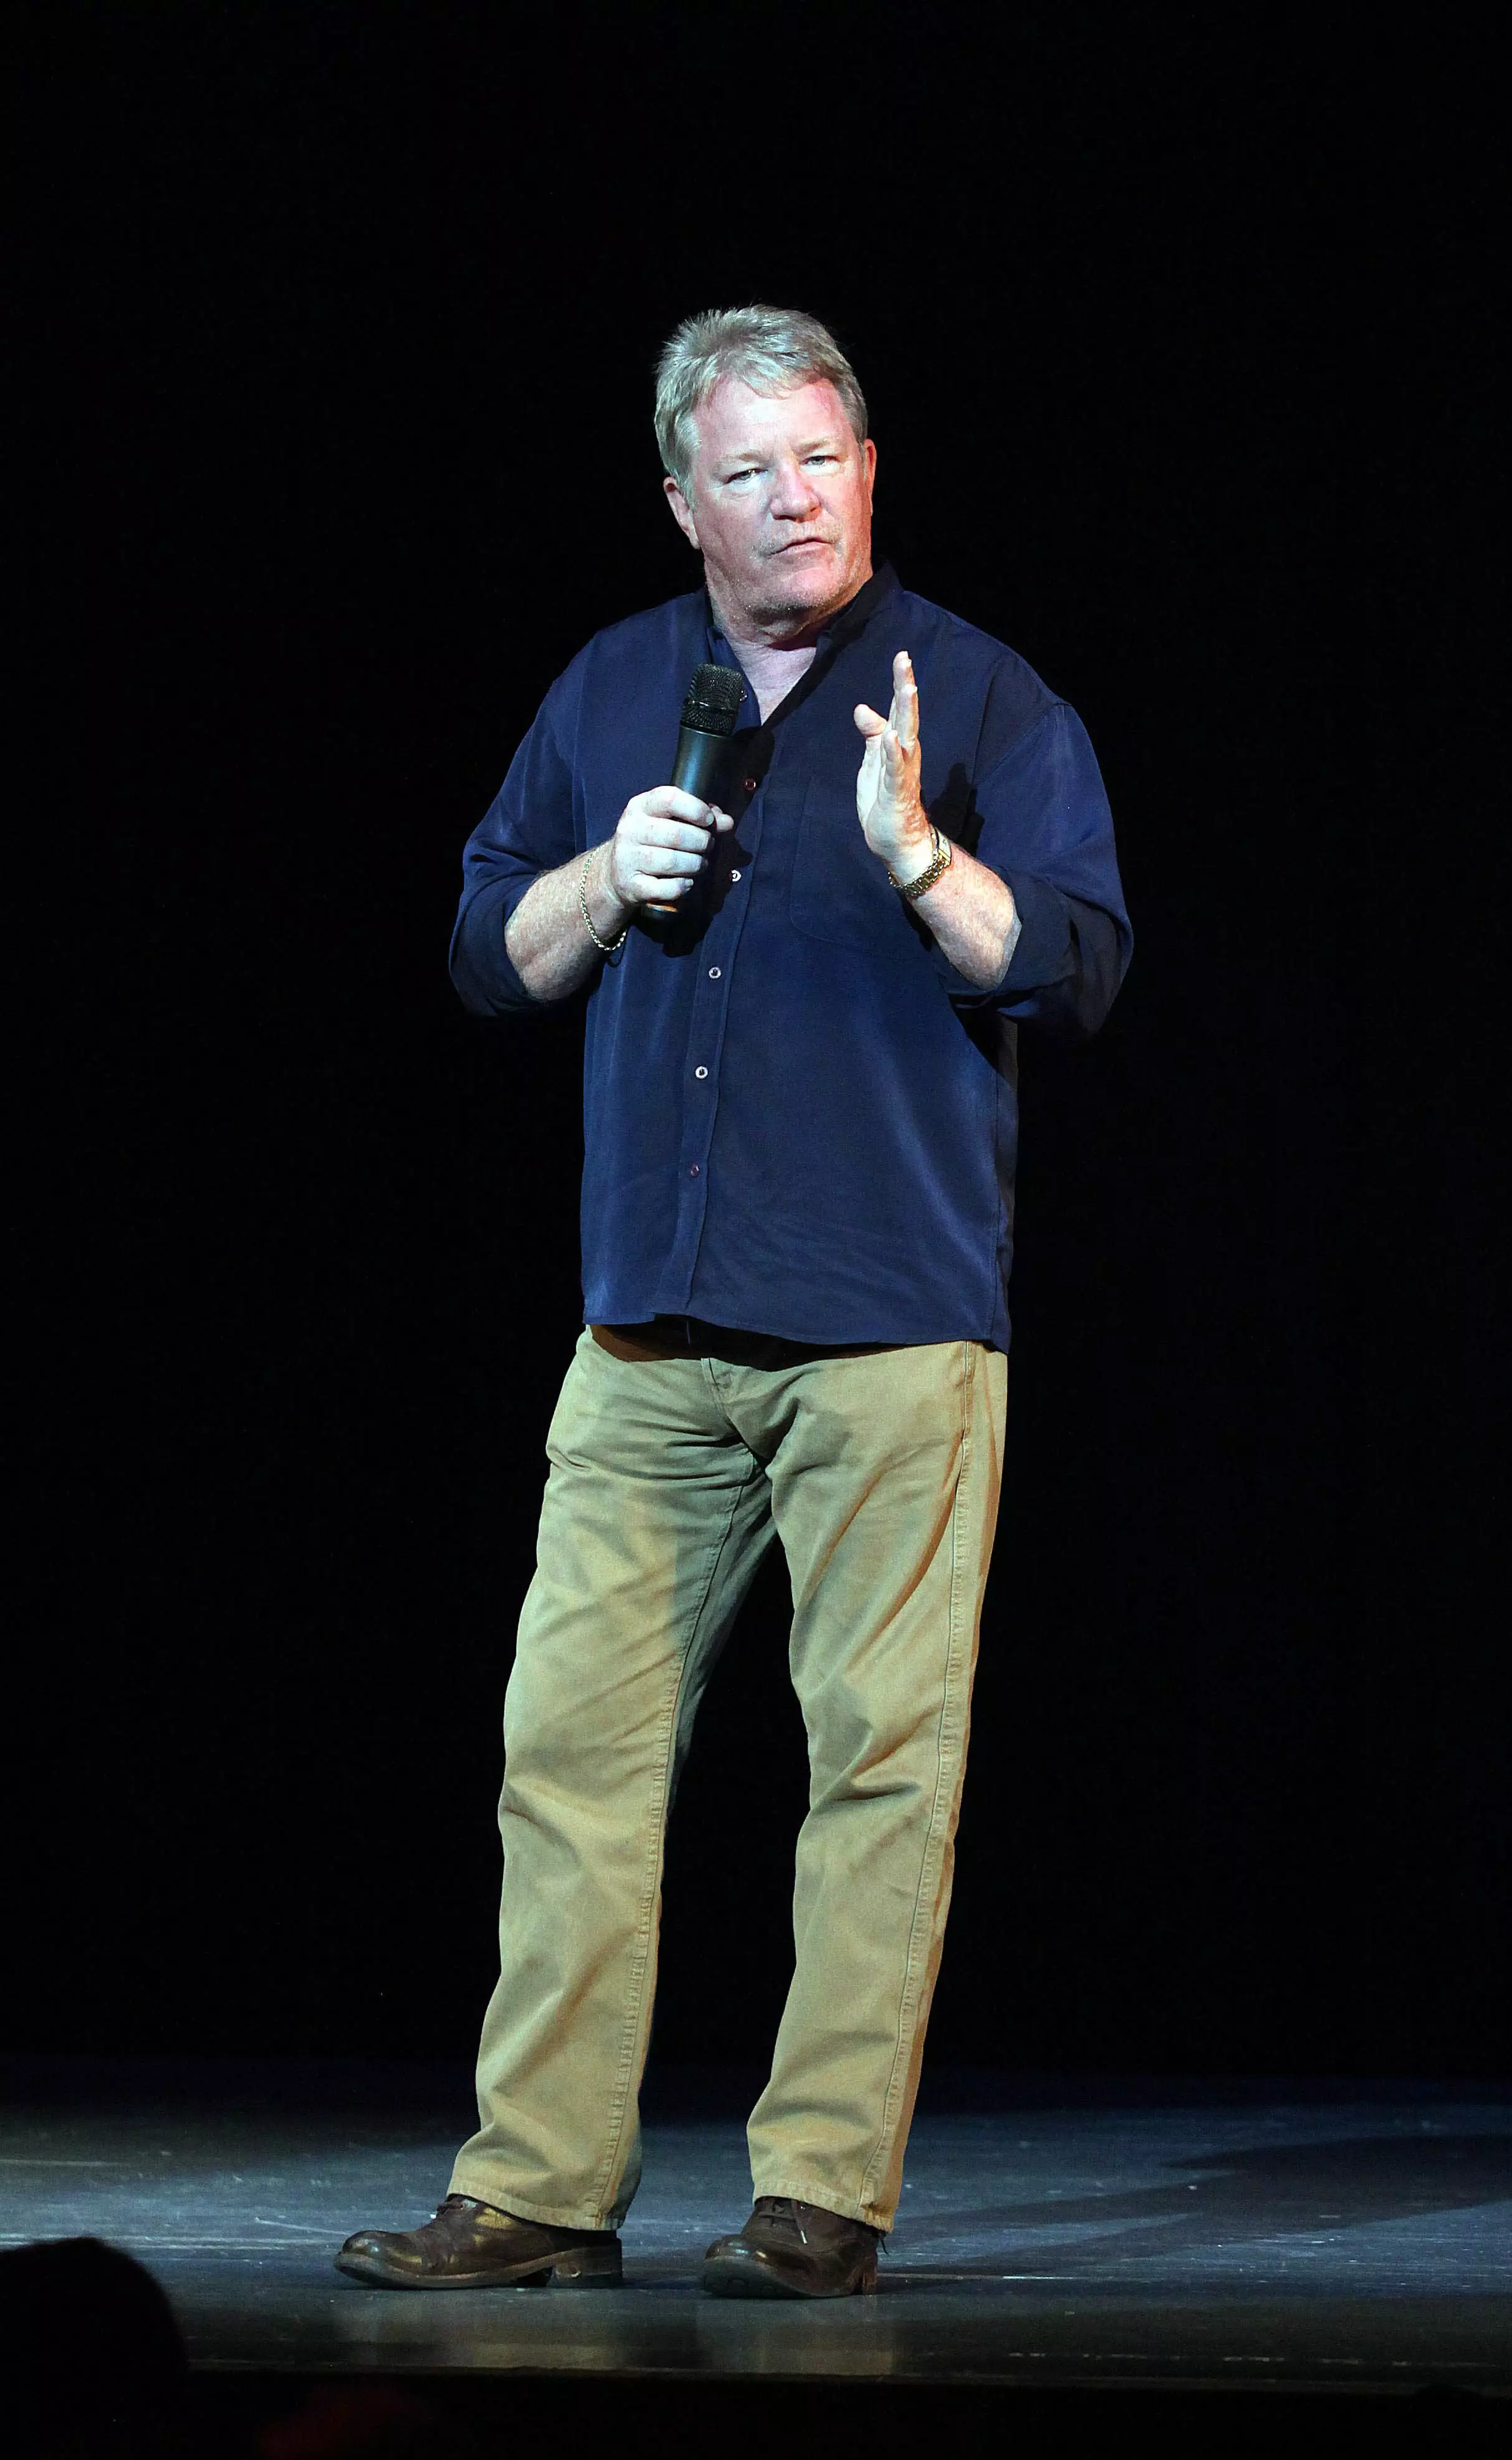 Controversial comedian Jim Davidson was branded a 